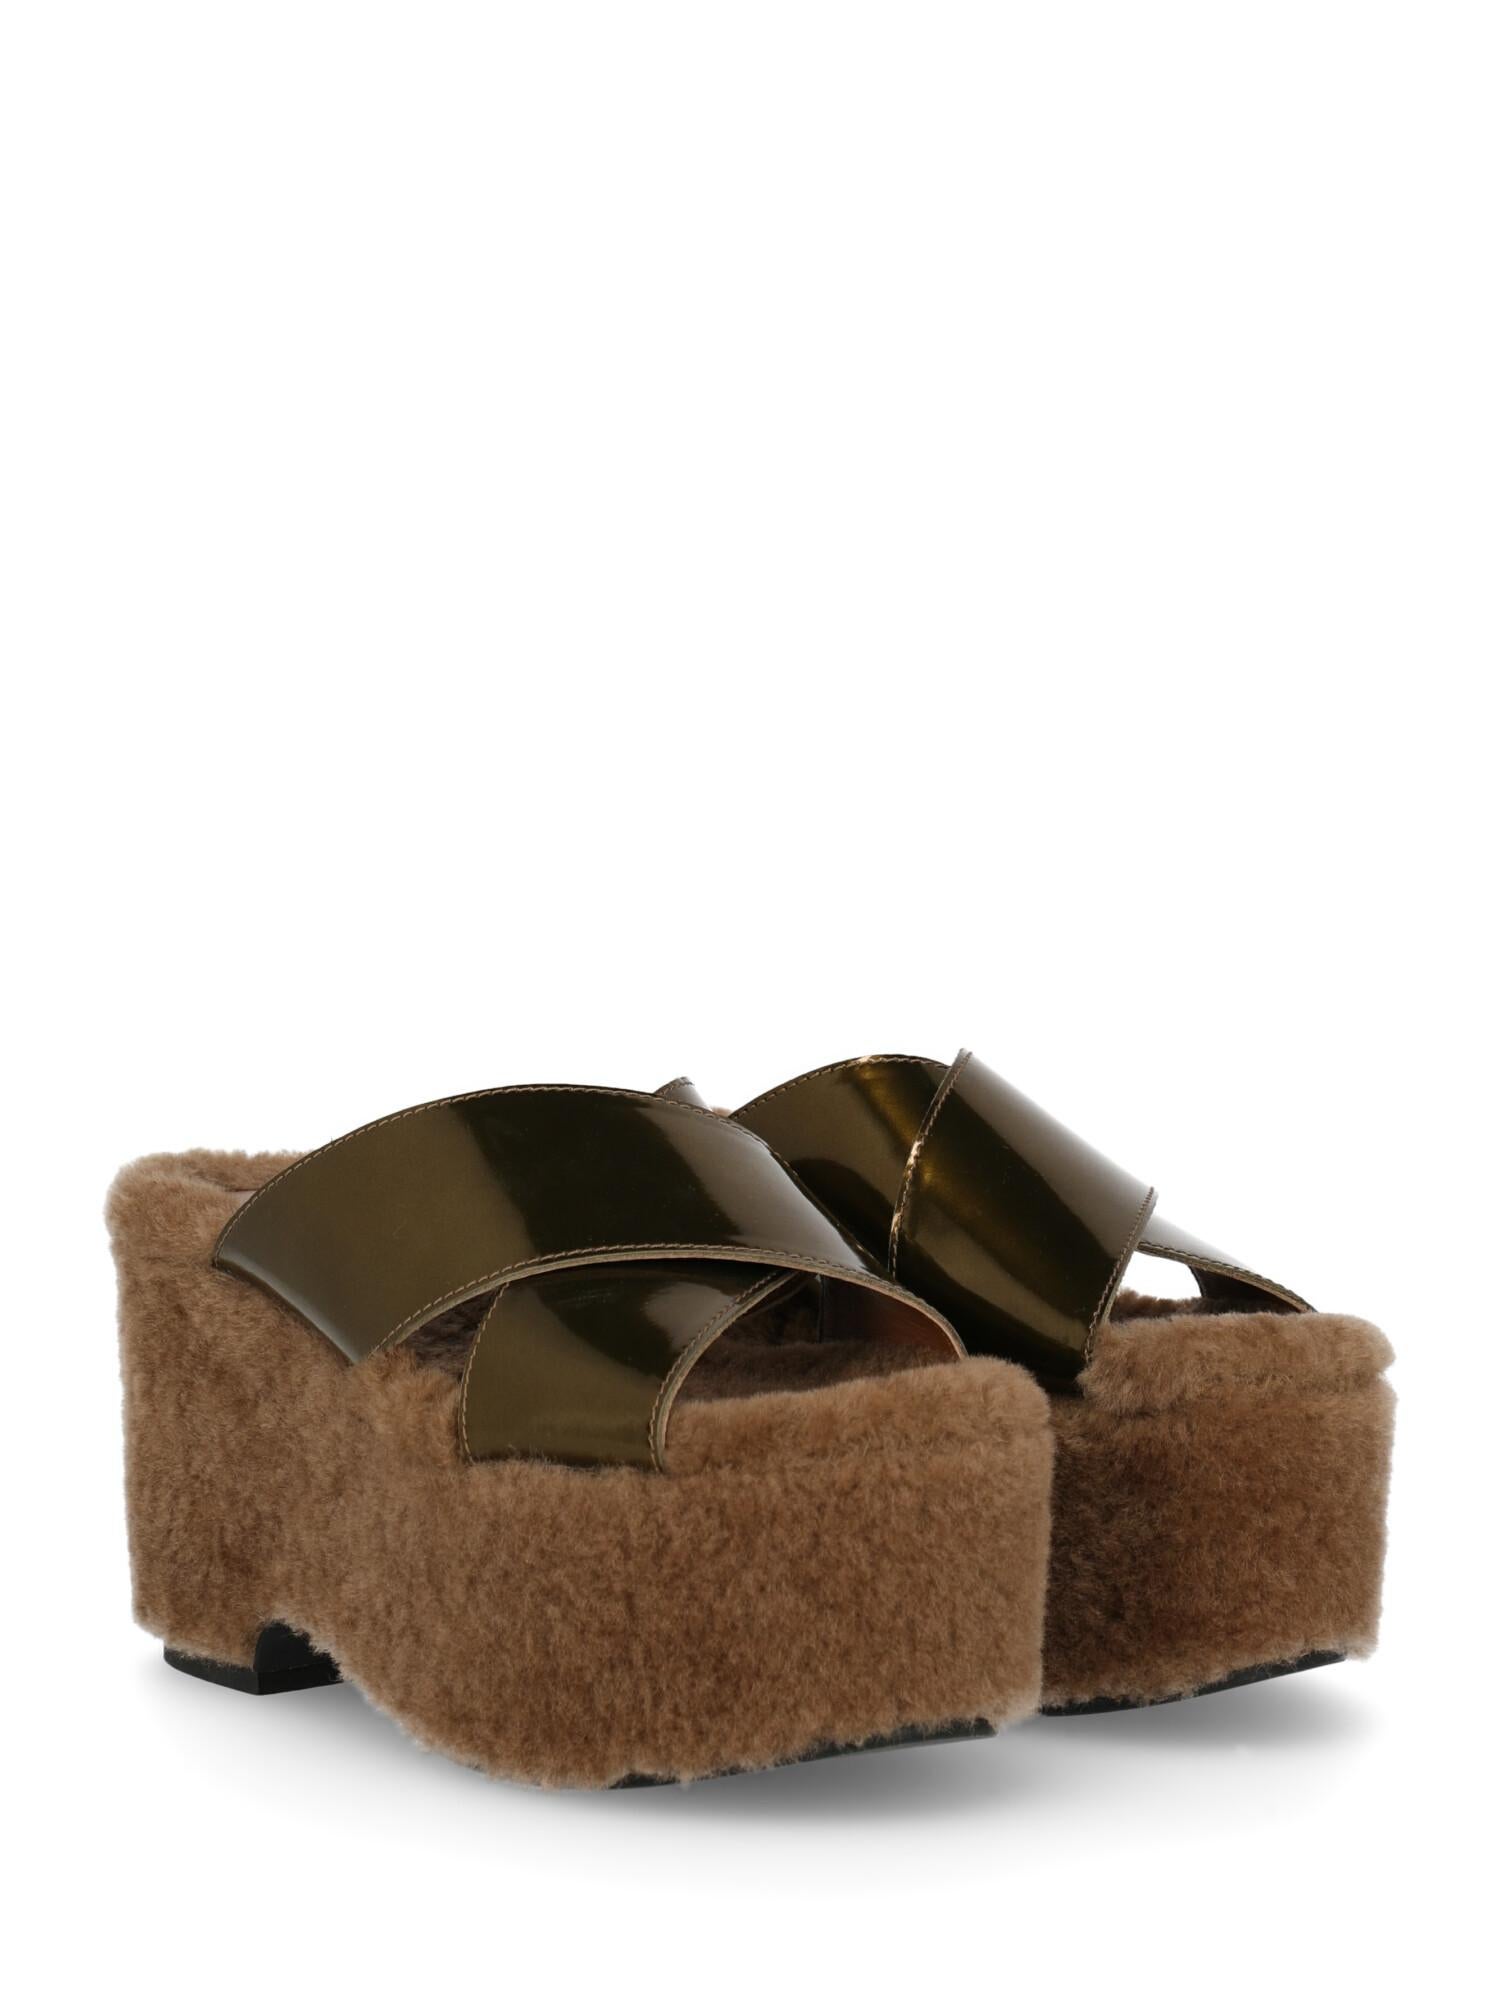 Wedges, faux fur, solid color, backless design, lining with logo, open toe, branded insole, wedge heel, low and flat heel, fur lining. Product Condition: Very Good. Sole: negligible signs of use. Insole: negligible footprint
